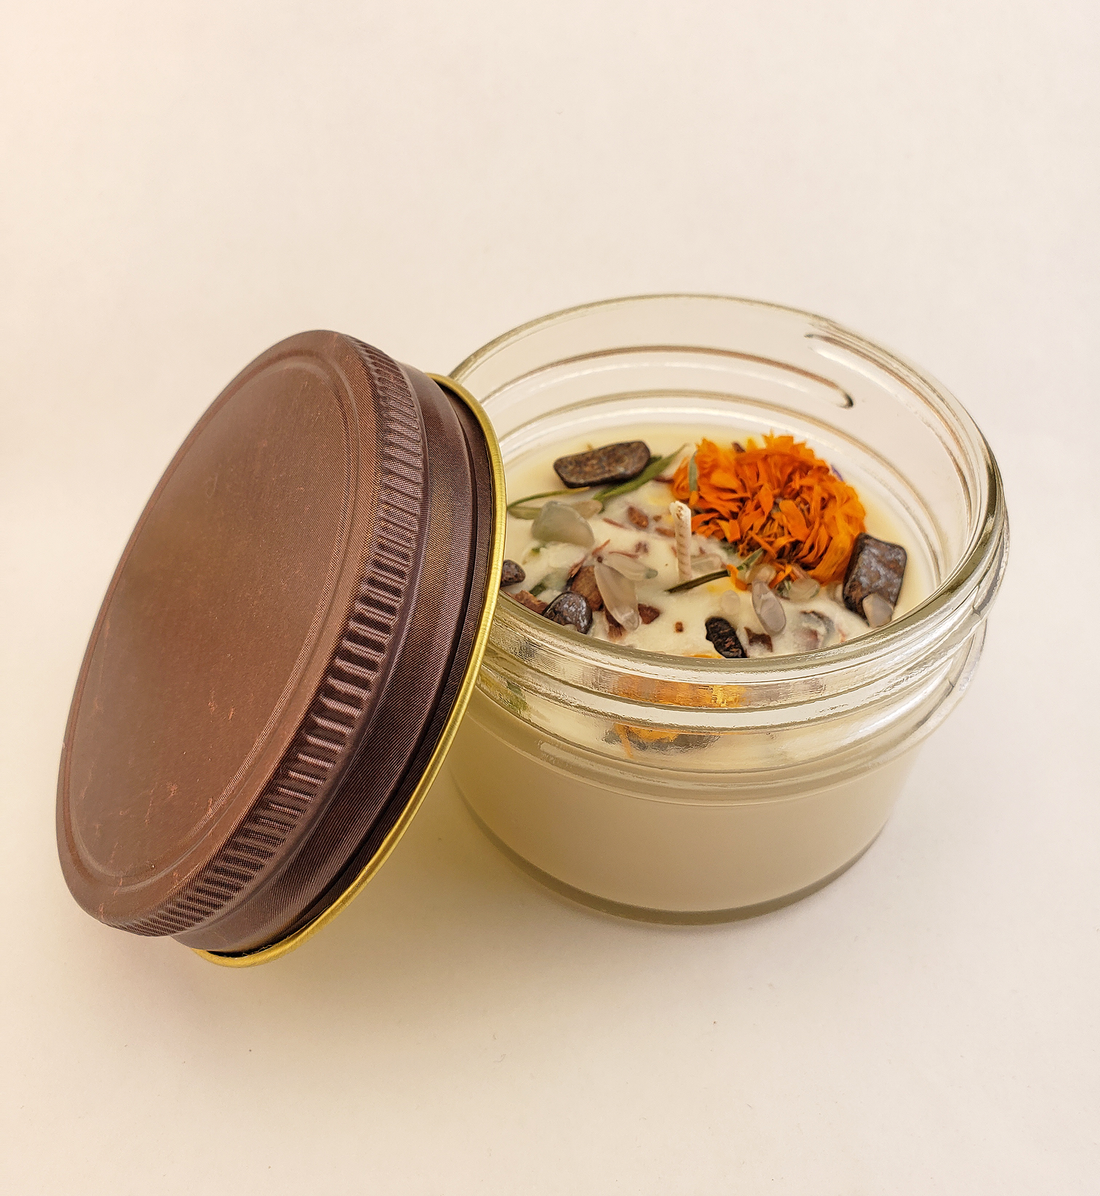 Coconut Soy Wax Handmade Scented Jar Candle & Crystal Chips - Strength - Scented with Essential Oils - Decorated with Dried Herbs